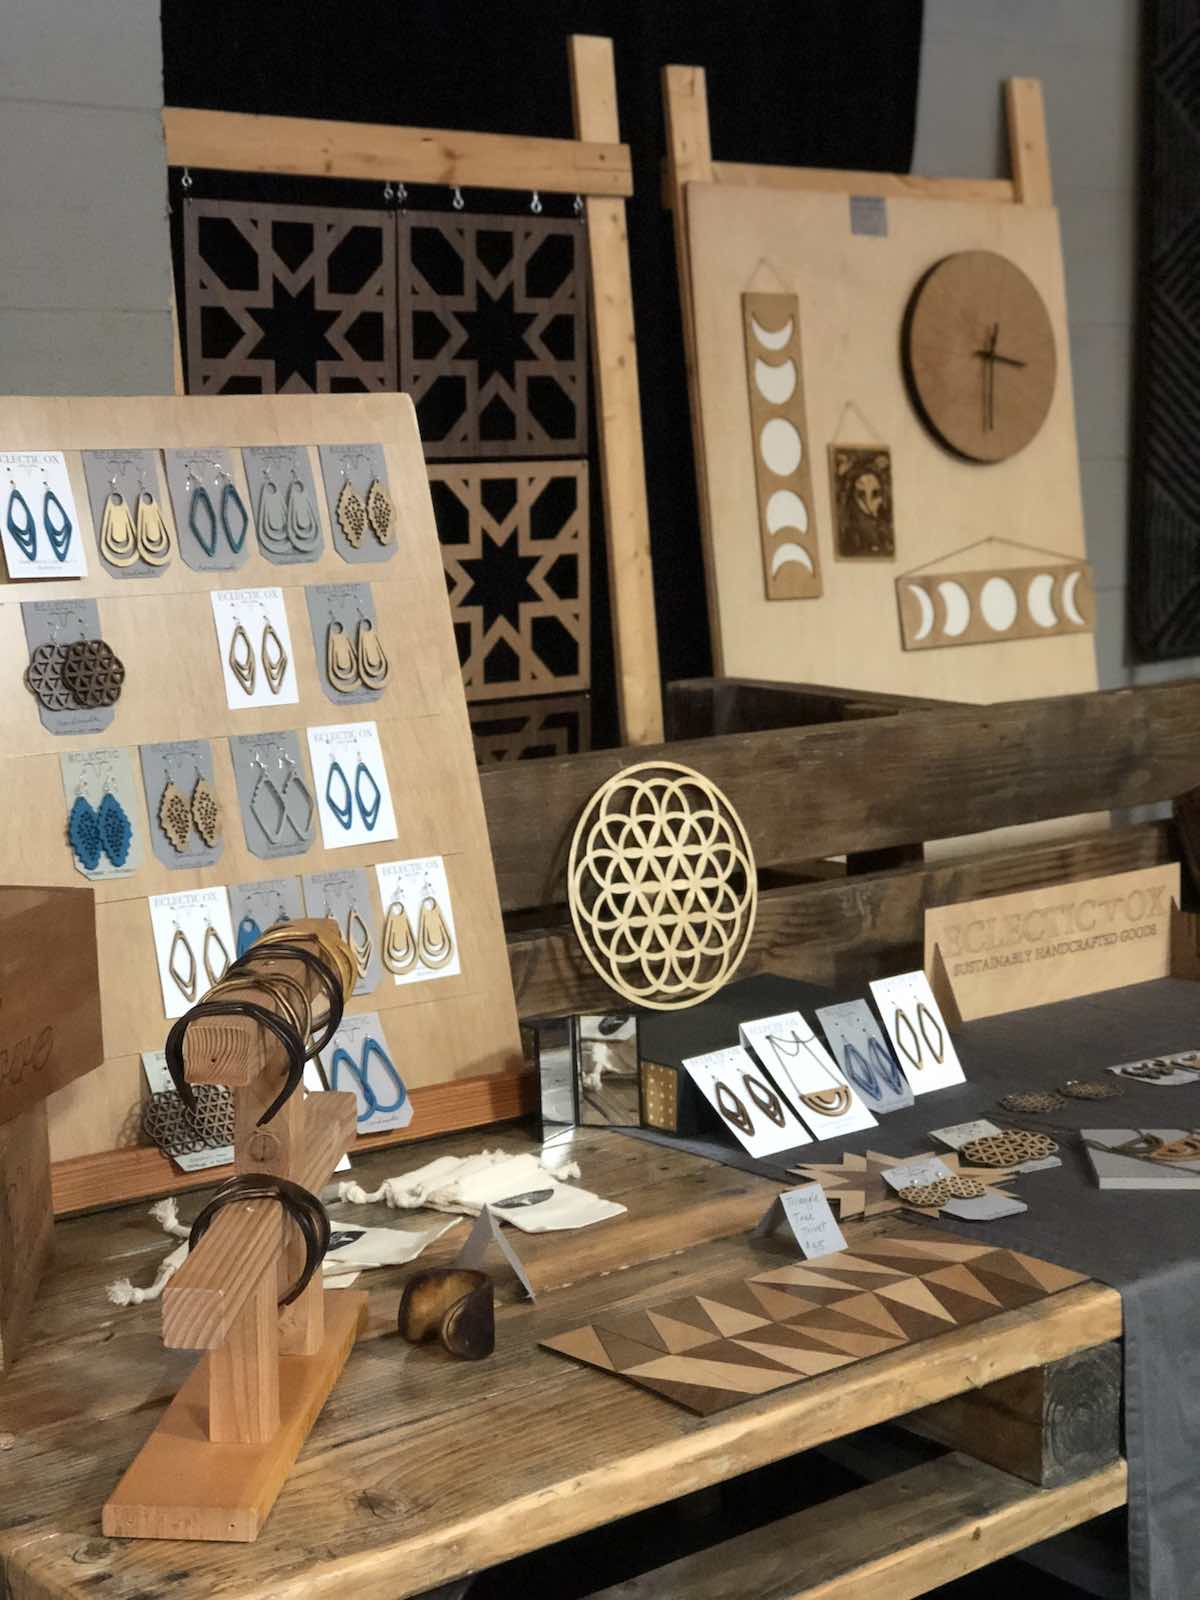 Handmade Jewelry, Home Goods and Wares by artist Molly Croteau of Eclectic Ox, Costa Mesa, California.(photo: Samantha Chagollan)